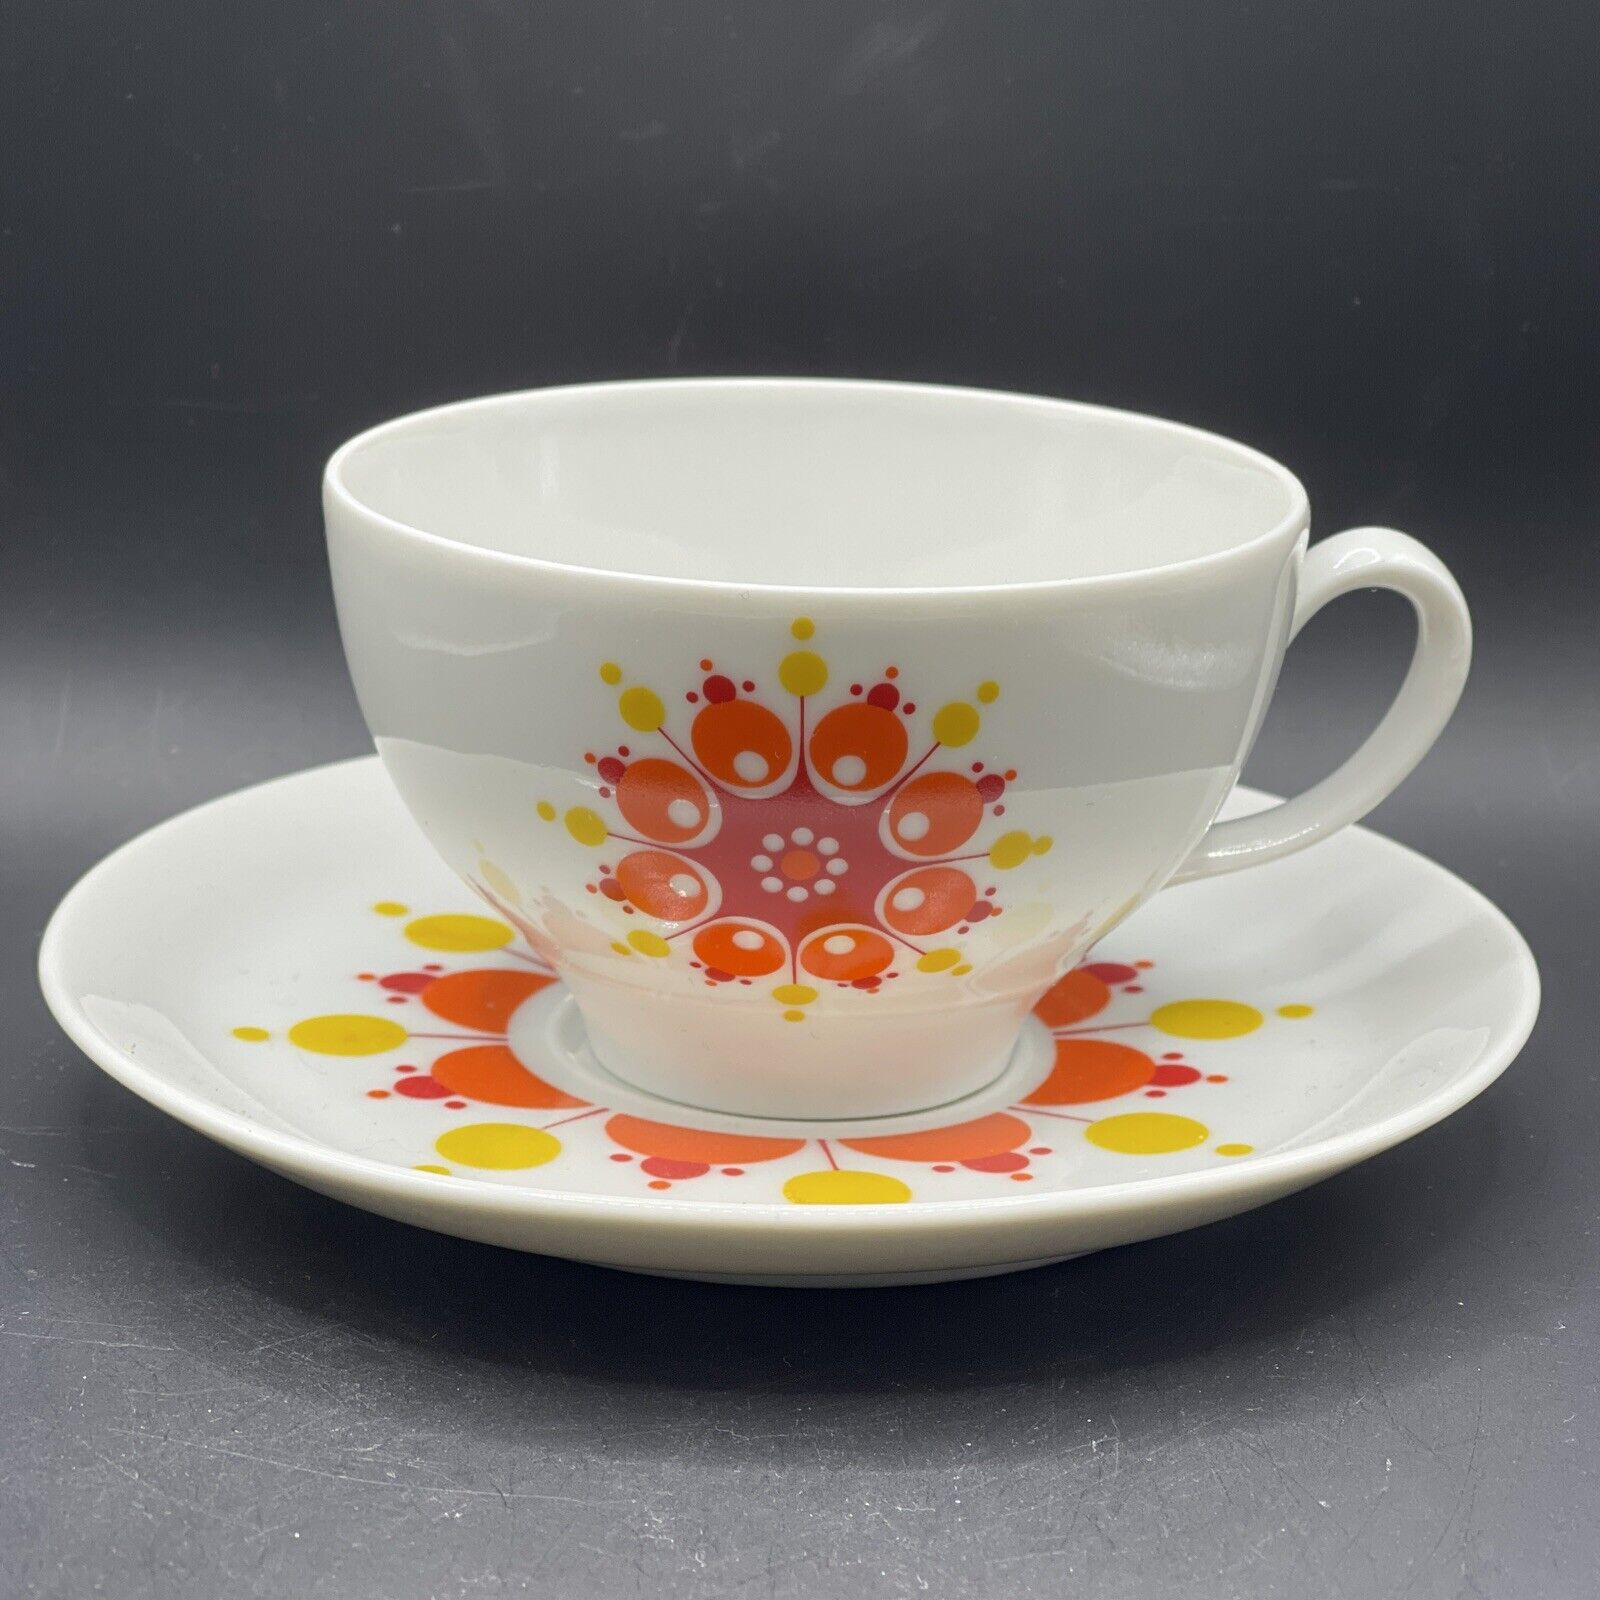 Winterling Schwarzenbach Bavarian Retro Teacup and Saucer Germany